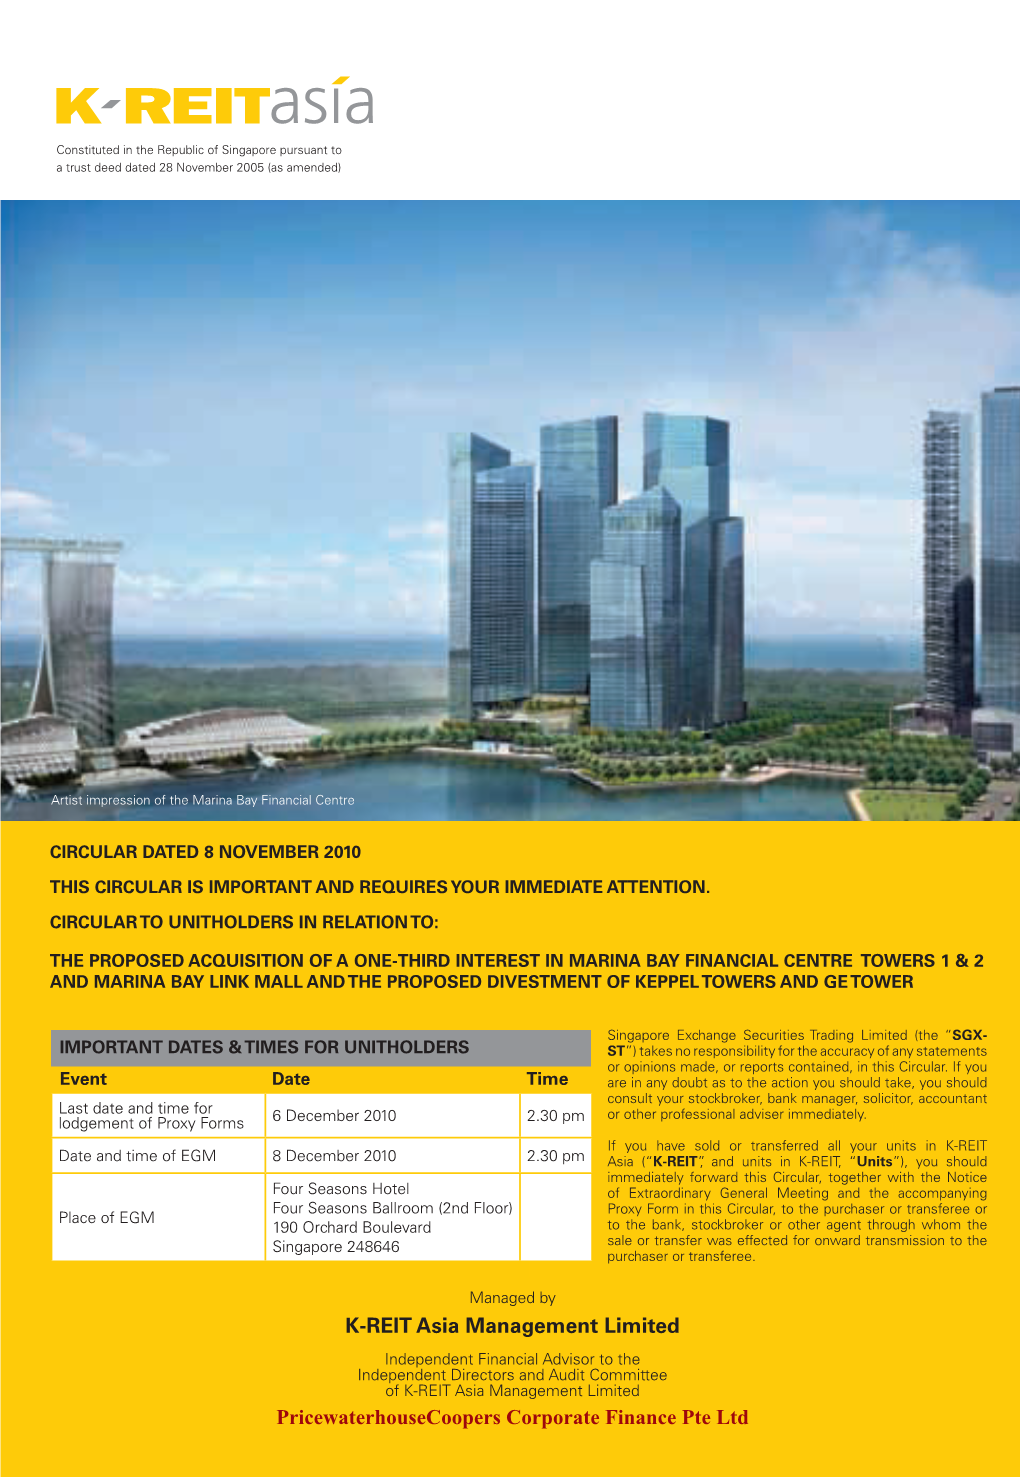 01 K-Reit 6Pp Gatefold.Indd 2 11/2/2010 6:27:21 PM Constituted in the Republic of Singapore Pursuant to a Trust Deed Dated 28 November 2005 (As Amended)